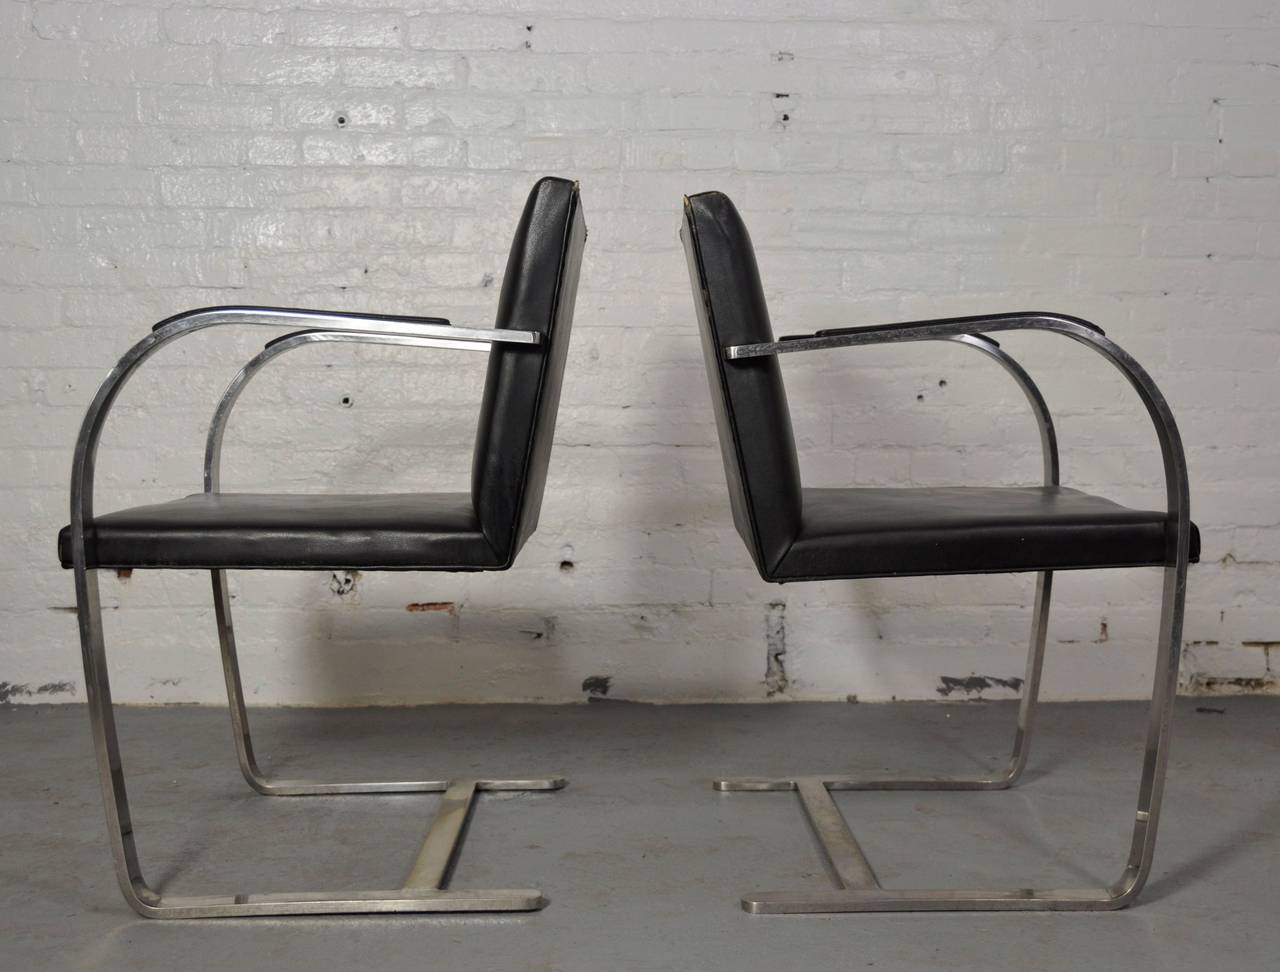 Vintage Pair of Knoll Brno Chairs designed by by Mies van der Rohe.